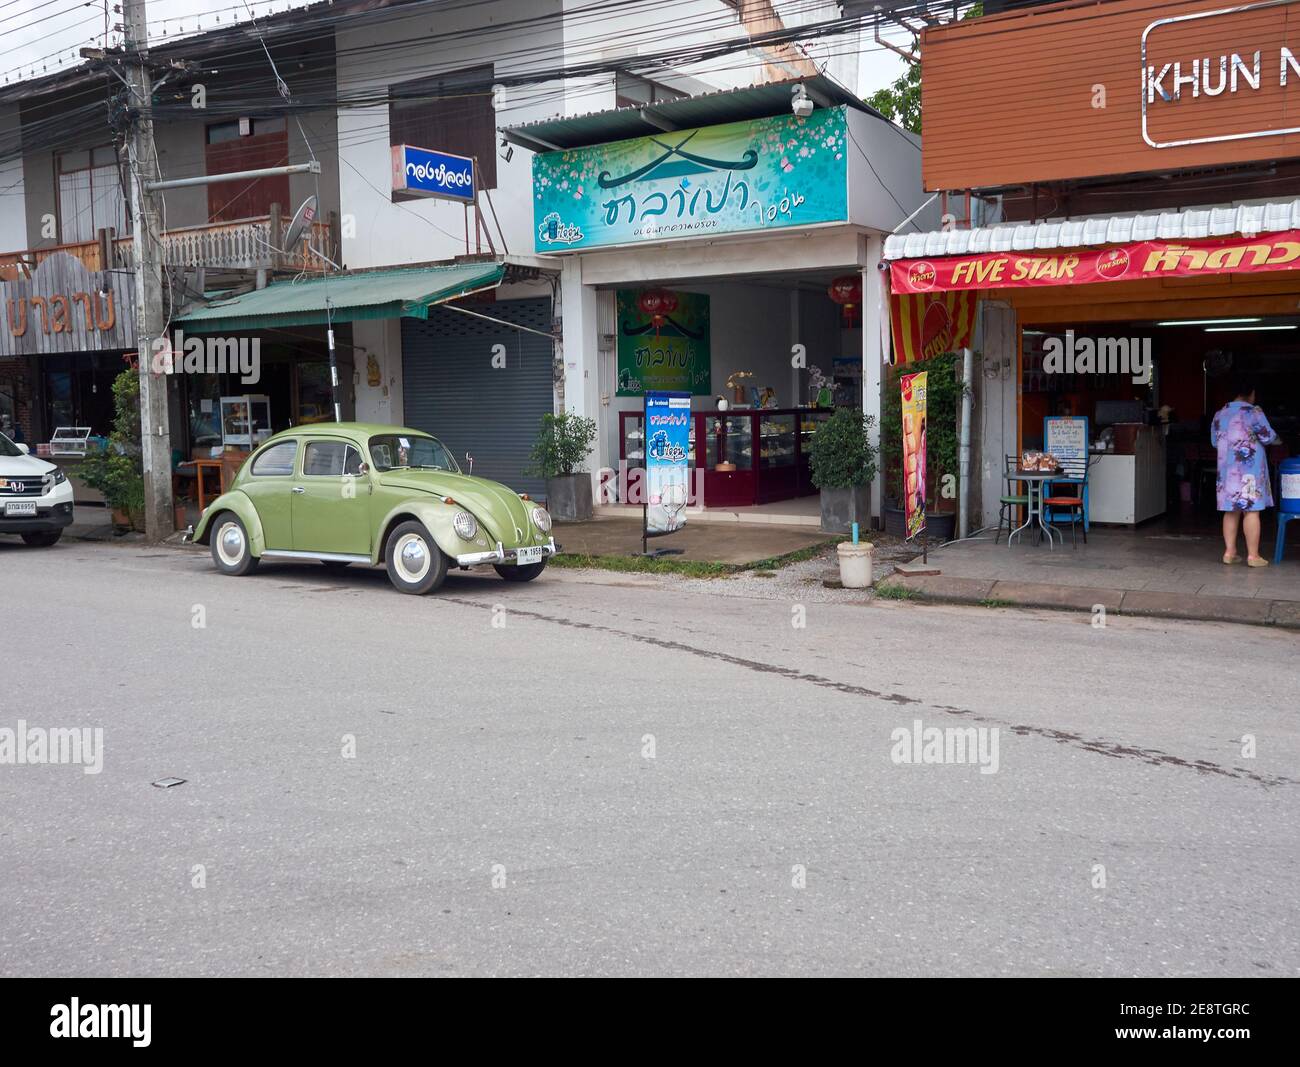 A green volkswagen beetle is parked on the side of the road in front of the shop Stock Photo